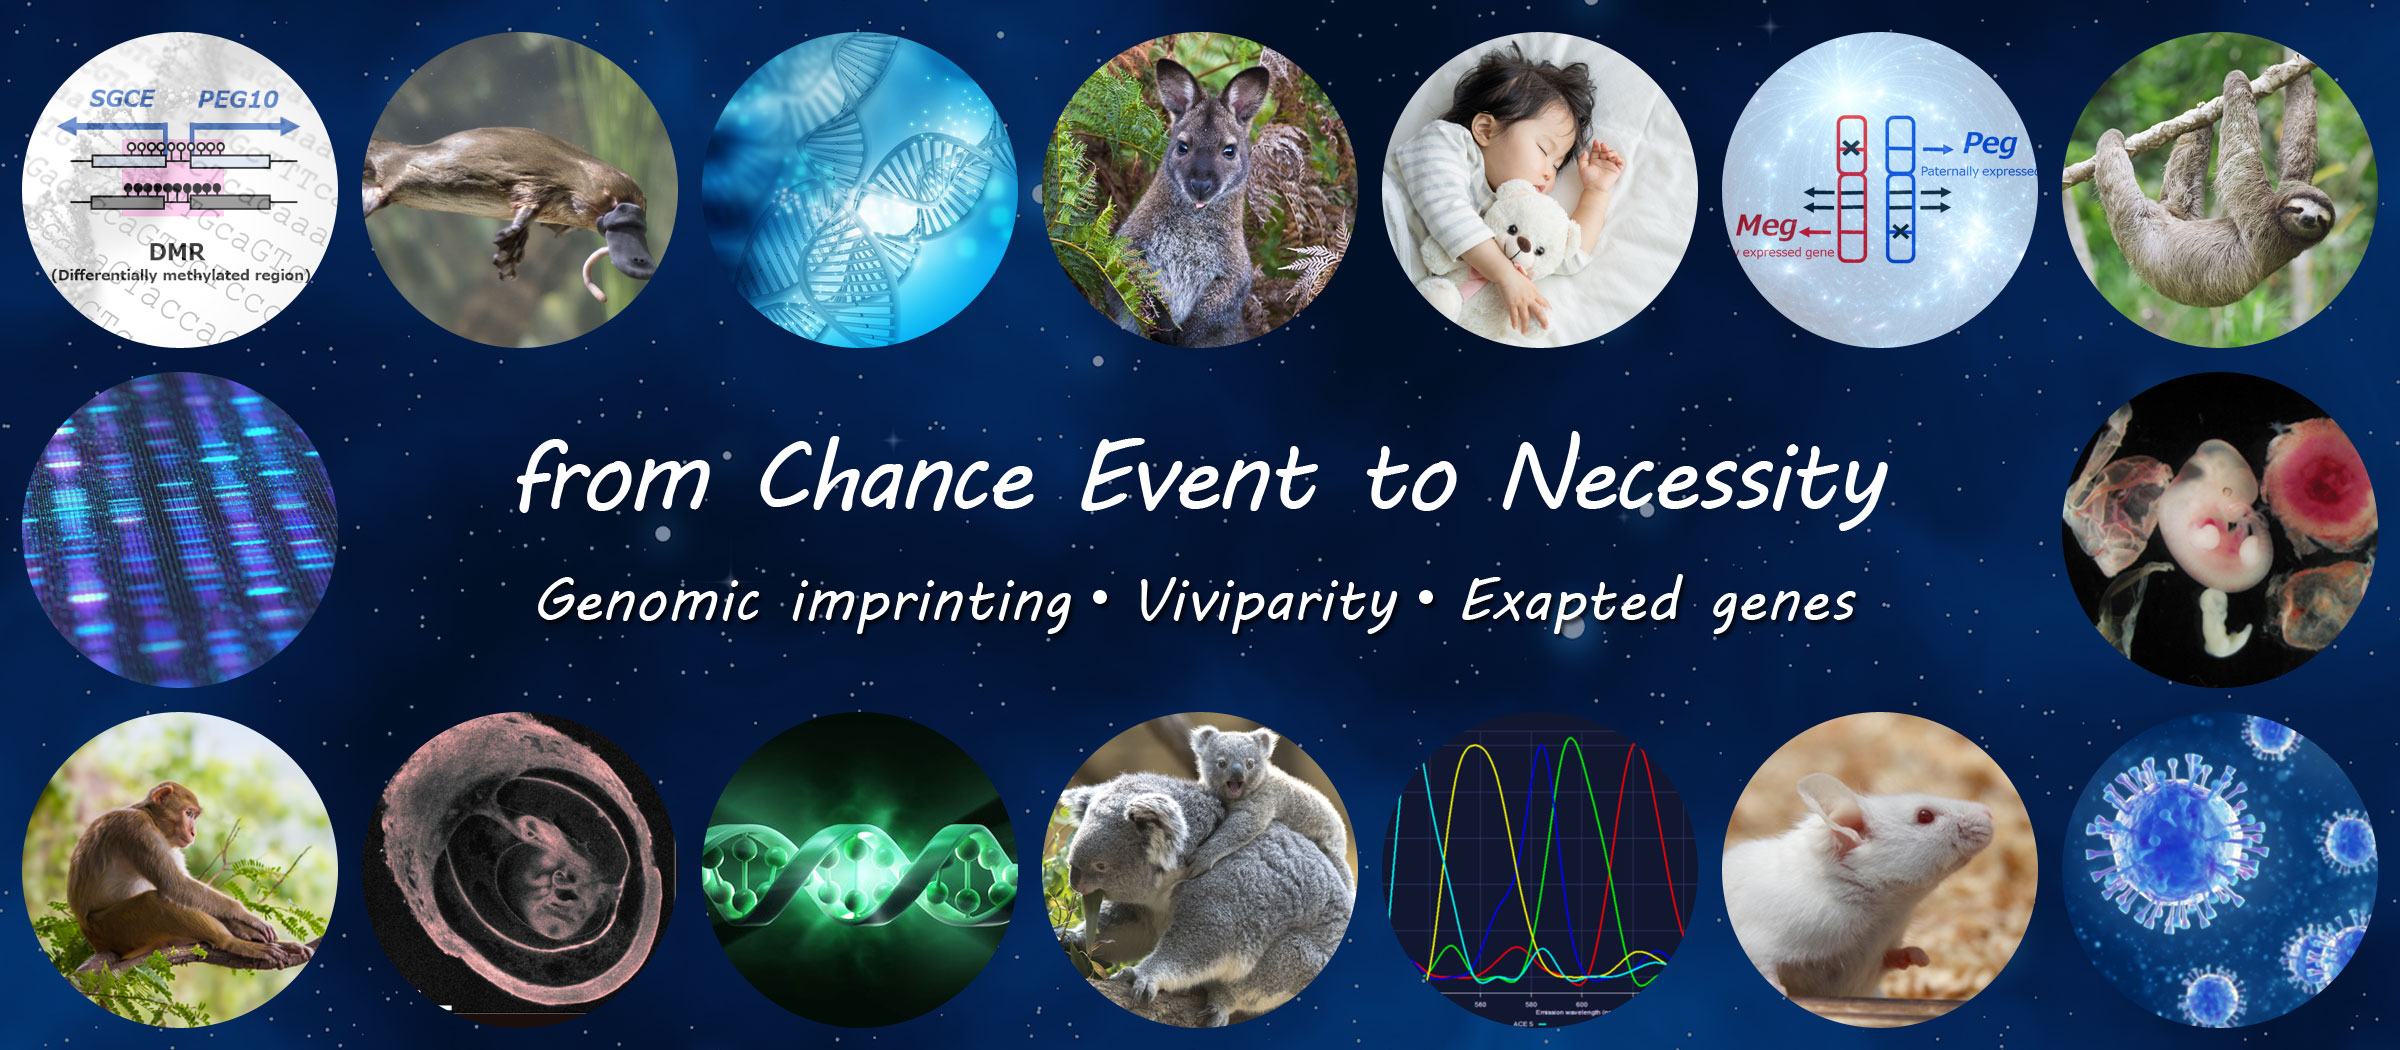 from Chance Event to Necessity, Genomic imprinting, Viviparity, Exapted genes